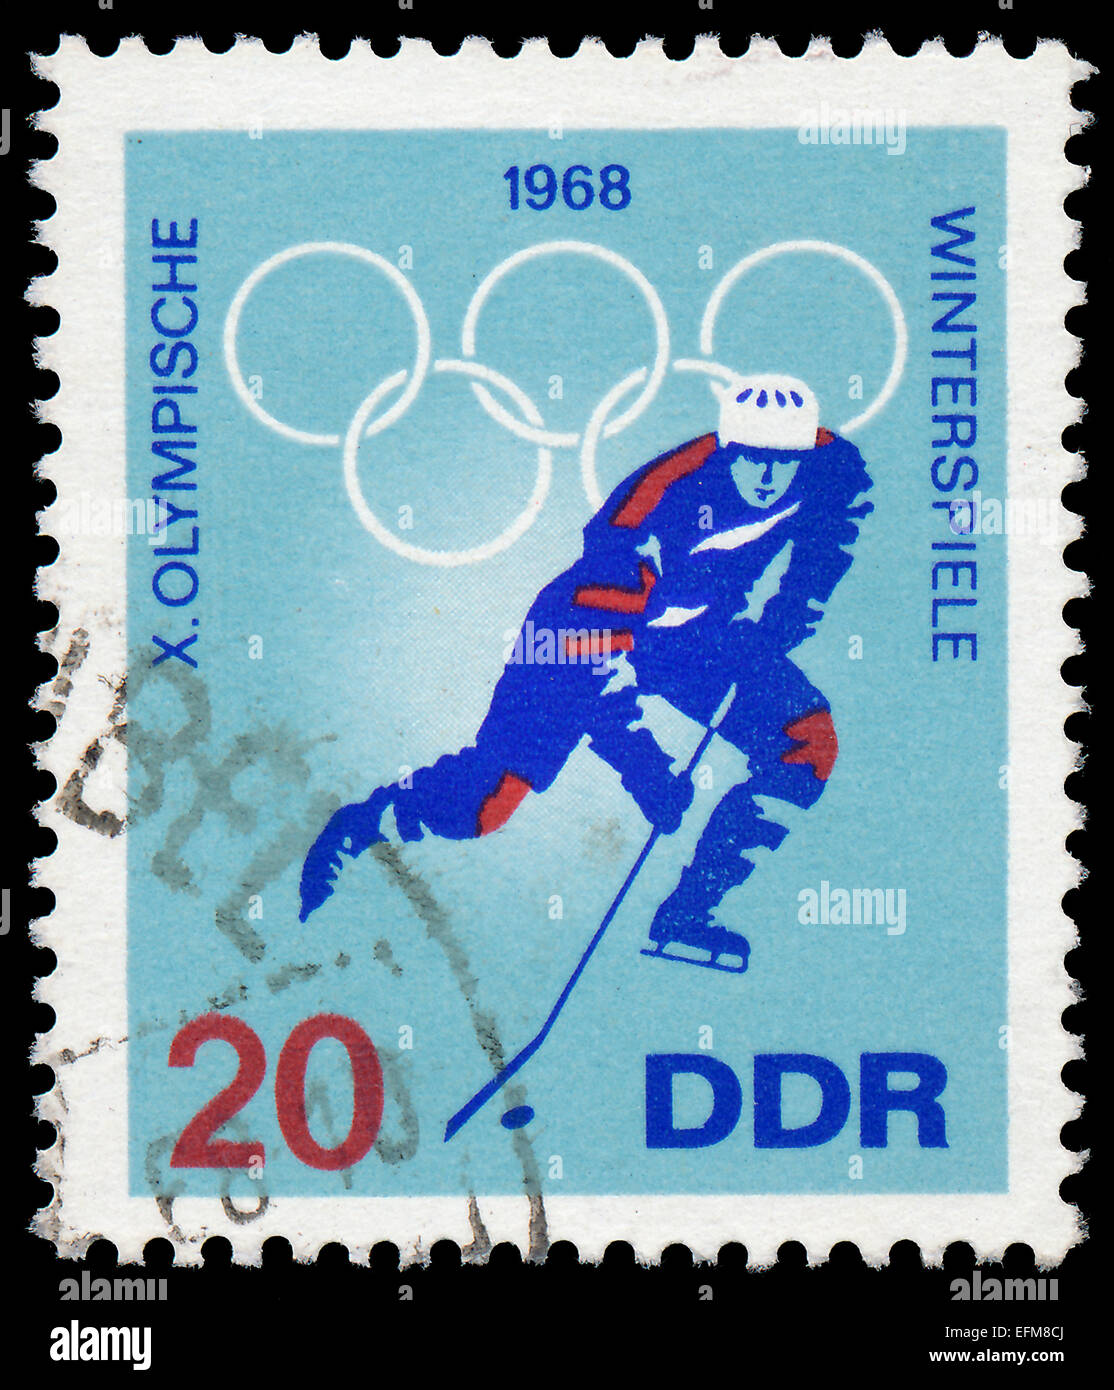 GDR - CIRCA 1968: A Stamp printed in GDR (East Germany) shows X Winter Olympic Games, 1968, circa 1968 Stock Photo